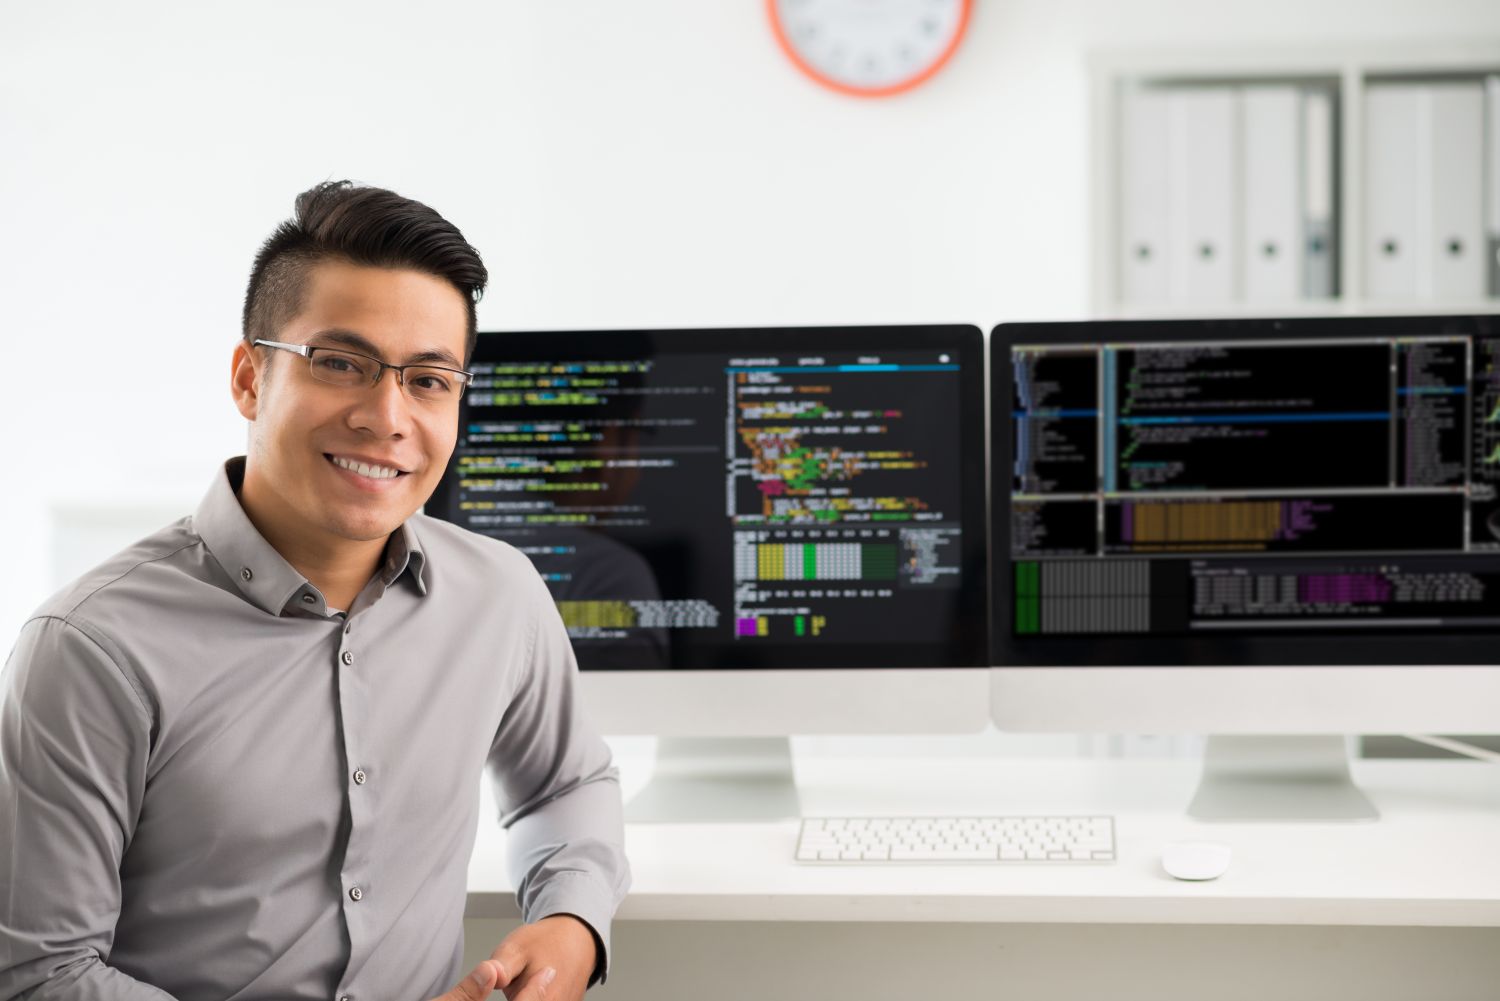 Master of Professional Information Technology (with specialisations) – Software Development specialisation